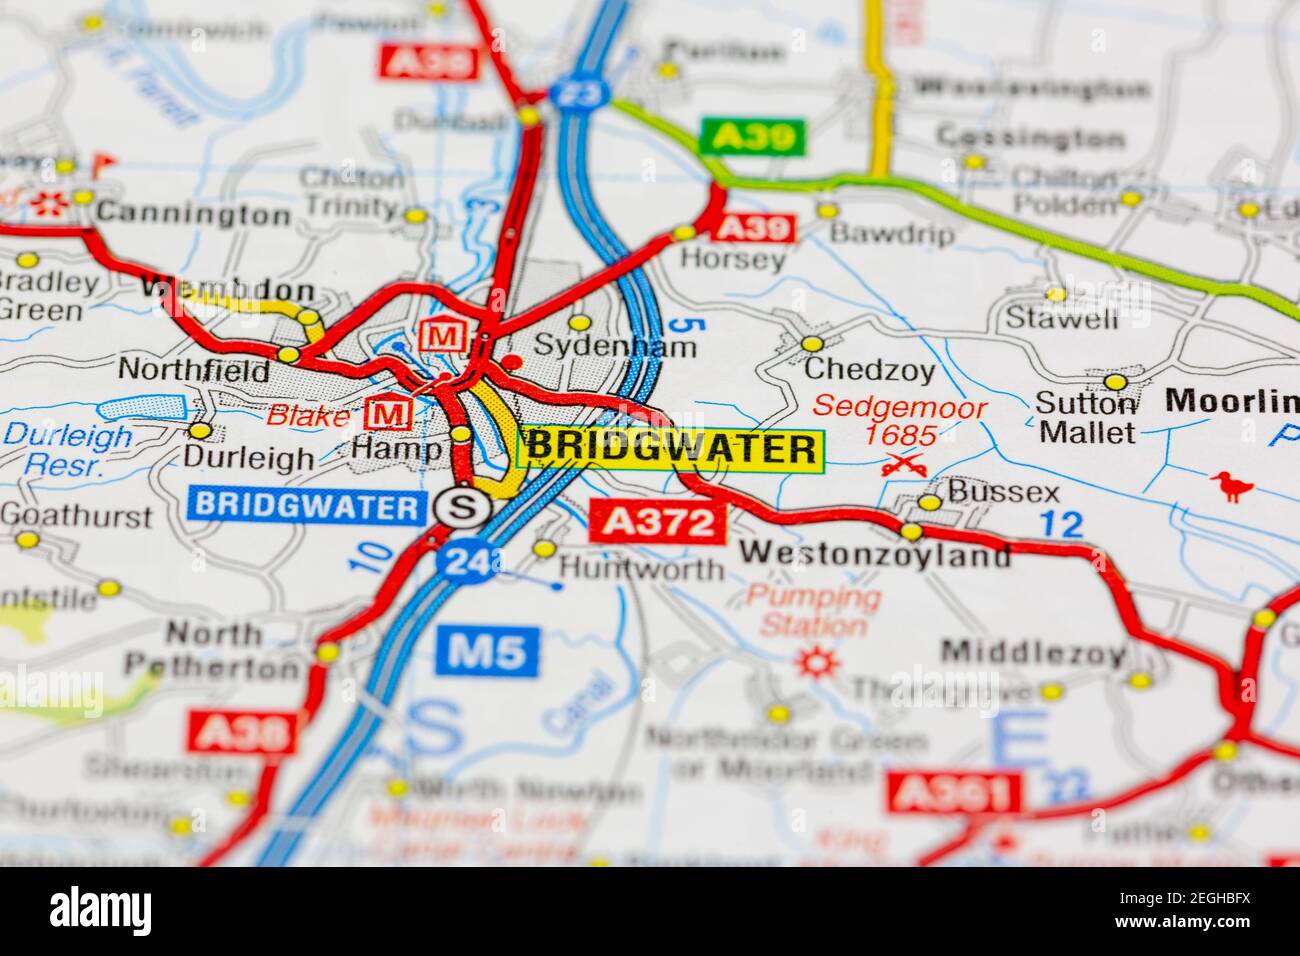 Bridgwater and surrounding areas shown on a road map or geography map Stock Photo